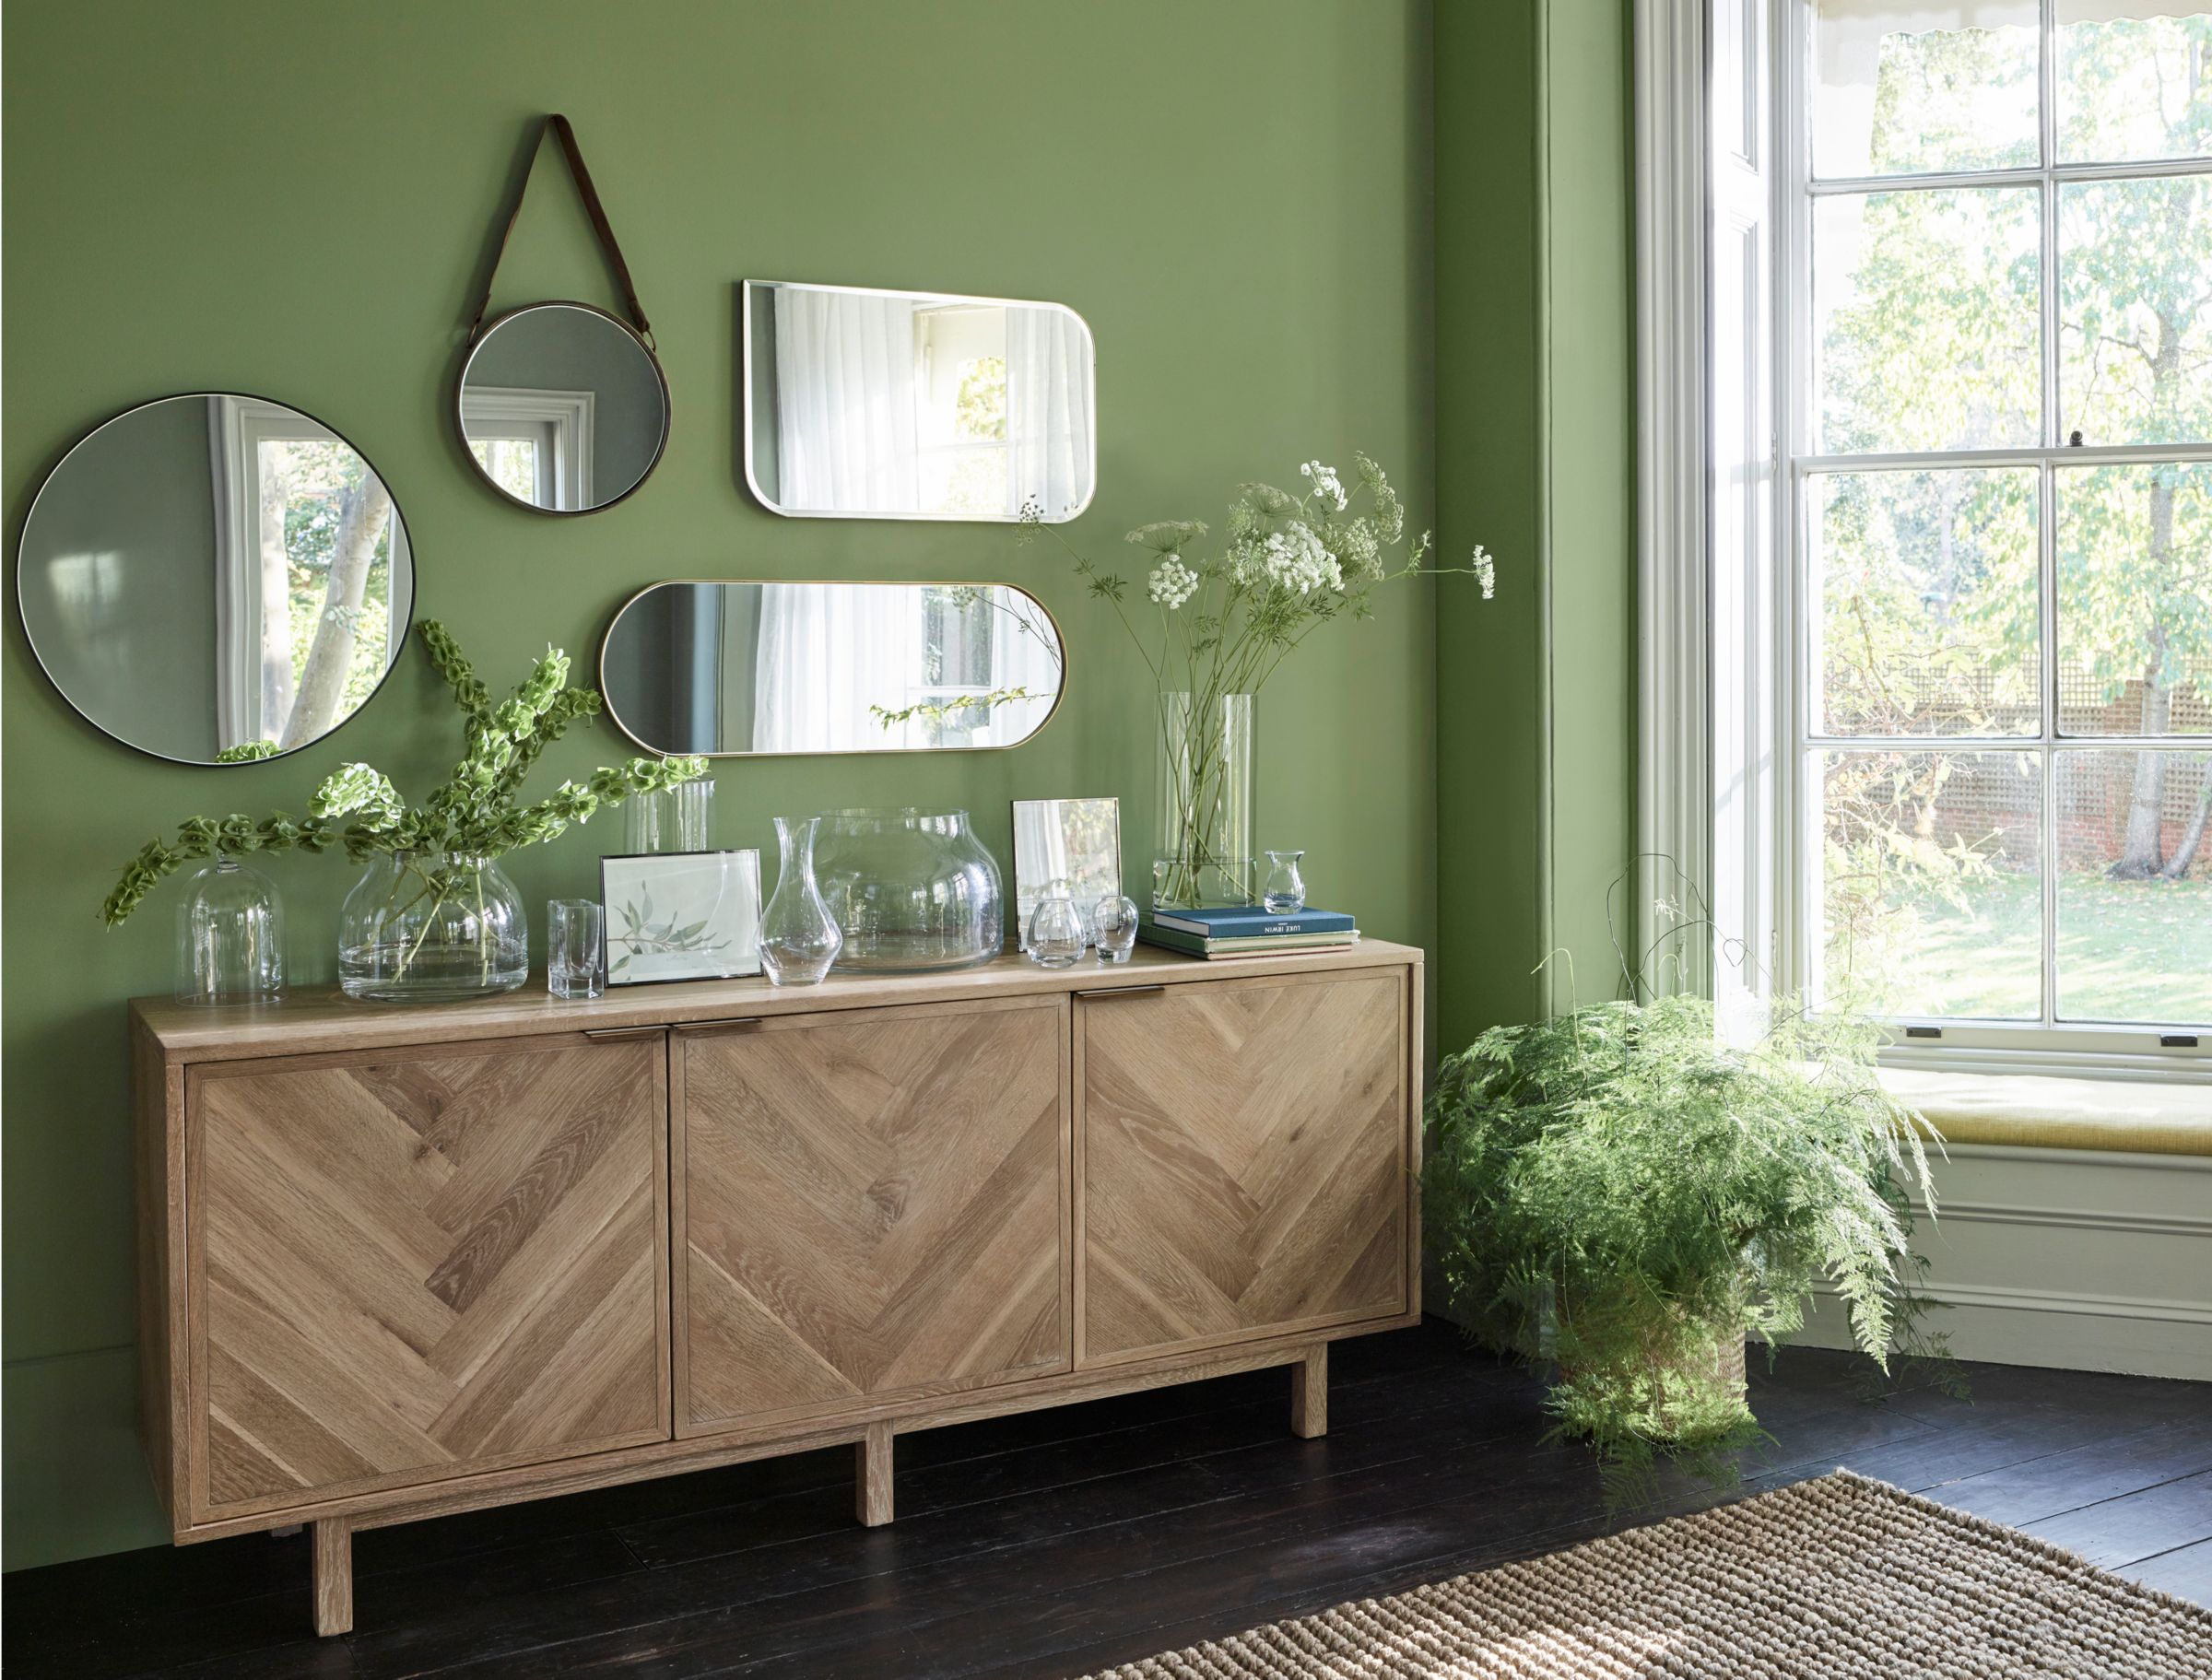 Time to reflect: clever new ways to use mirrors in your home